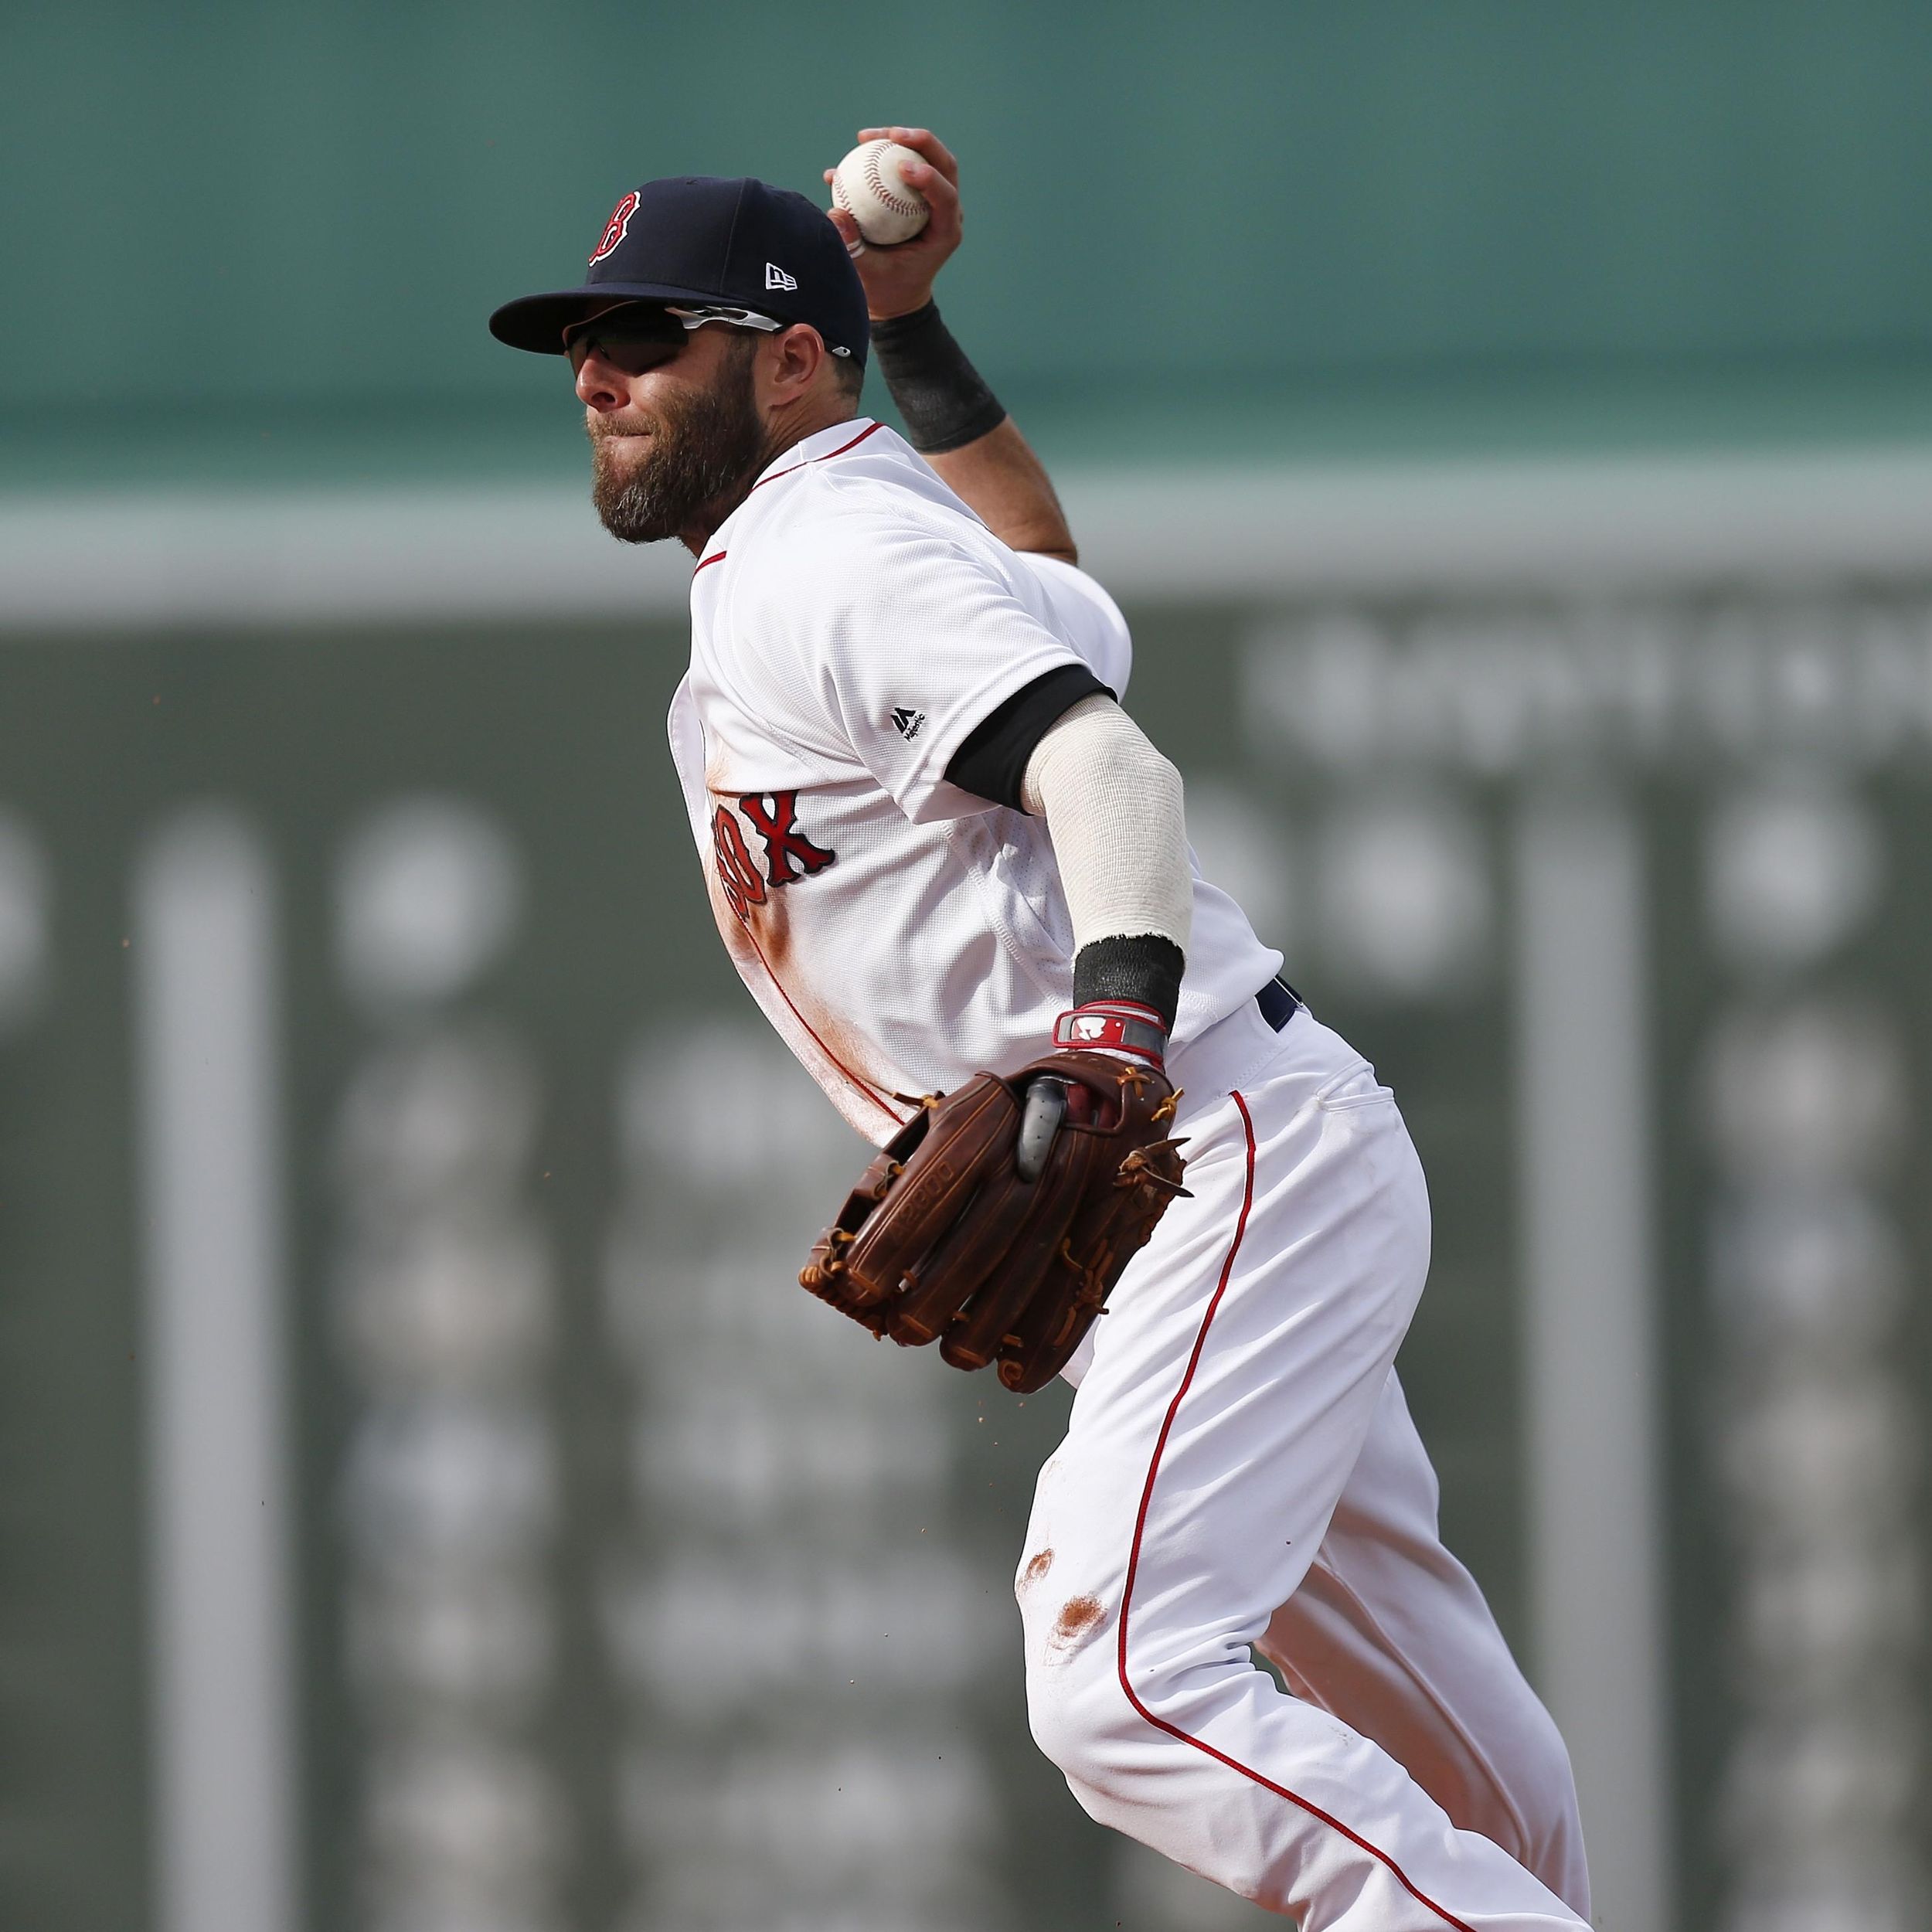 Dustin Pedroia gets back in swing of things